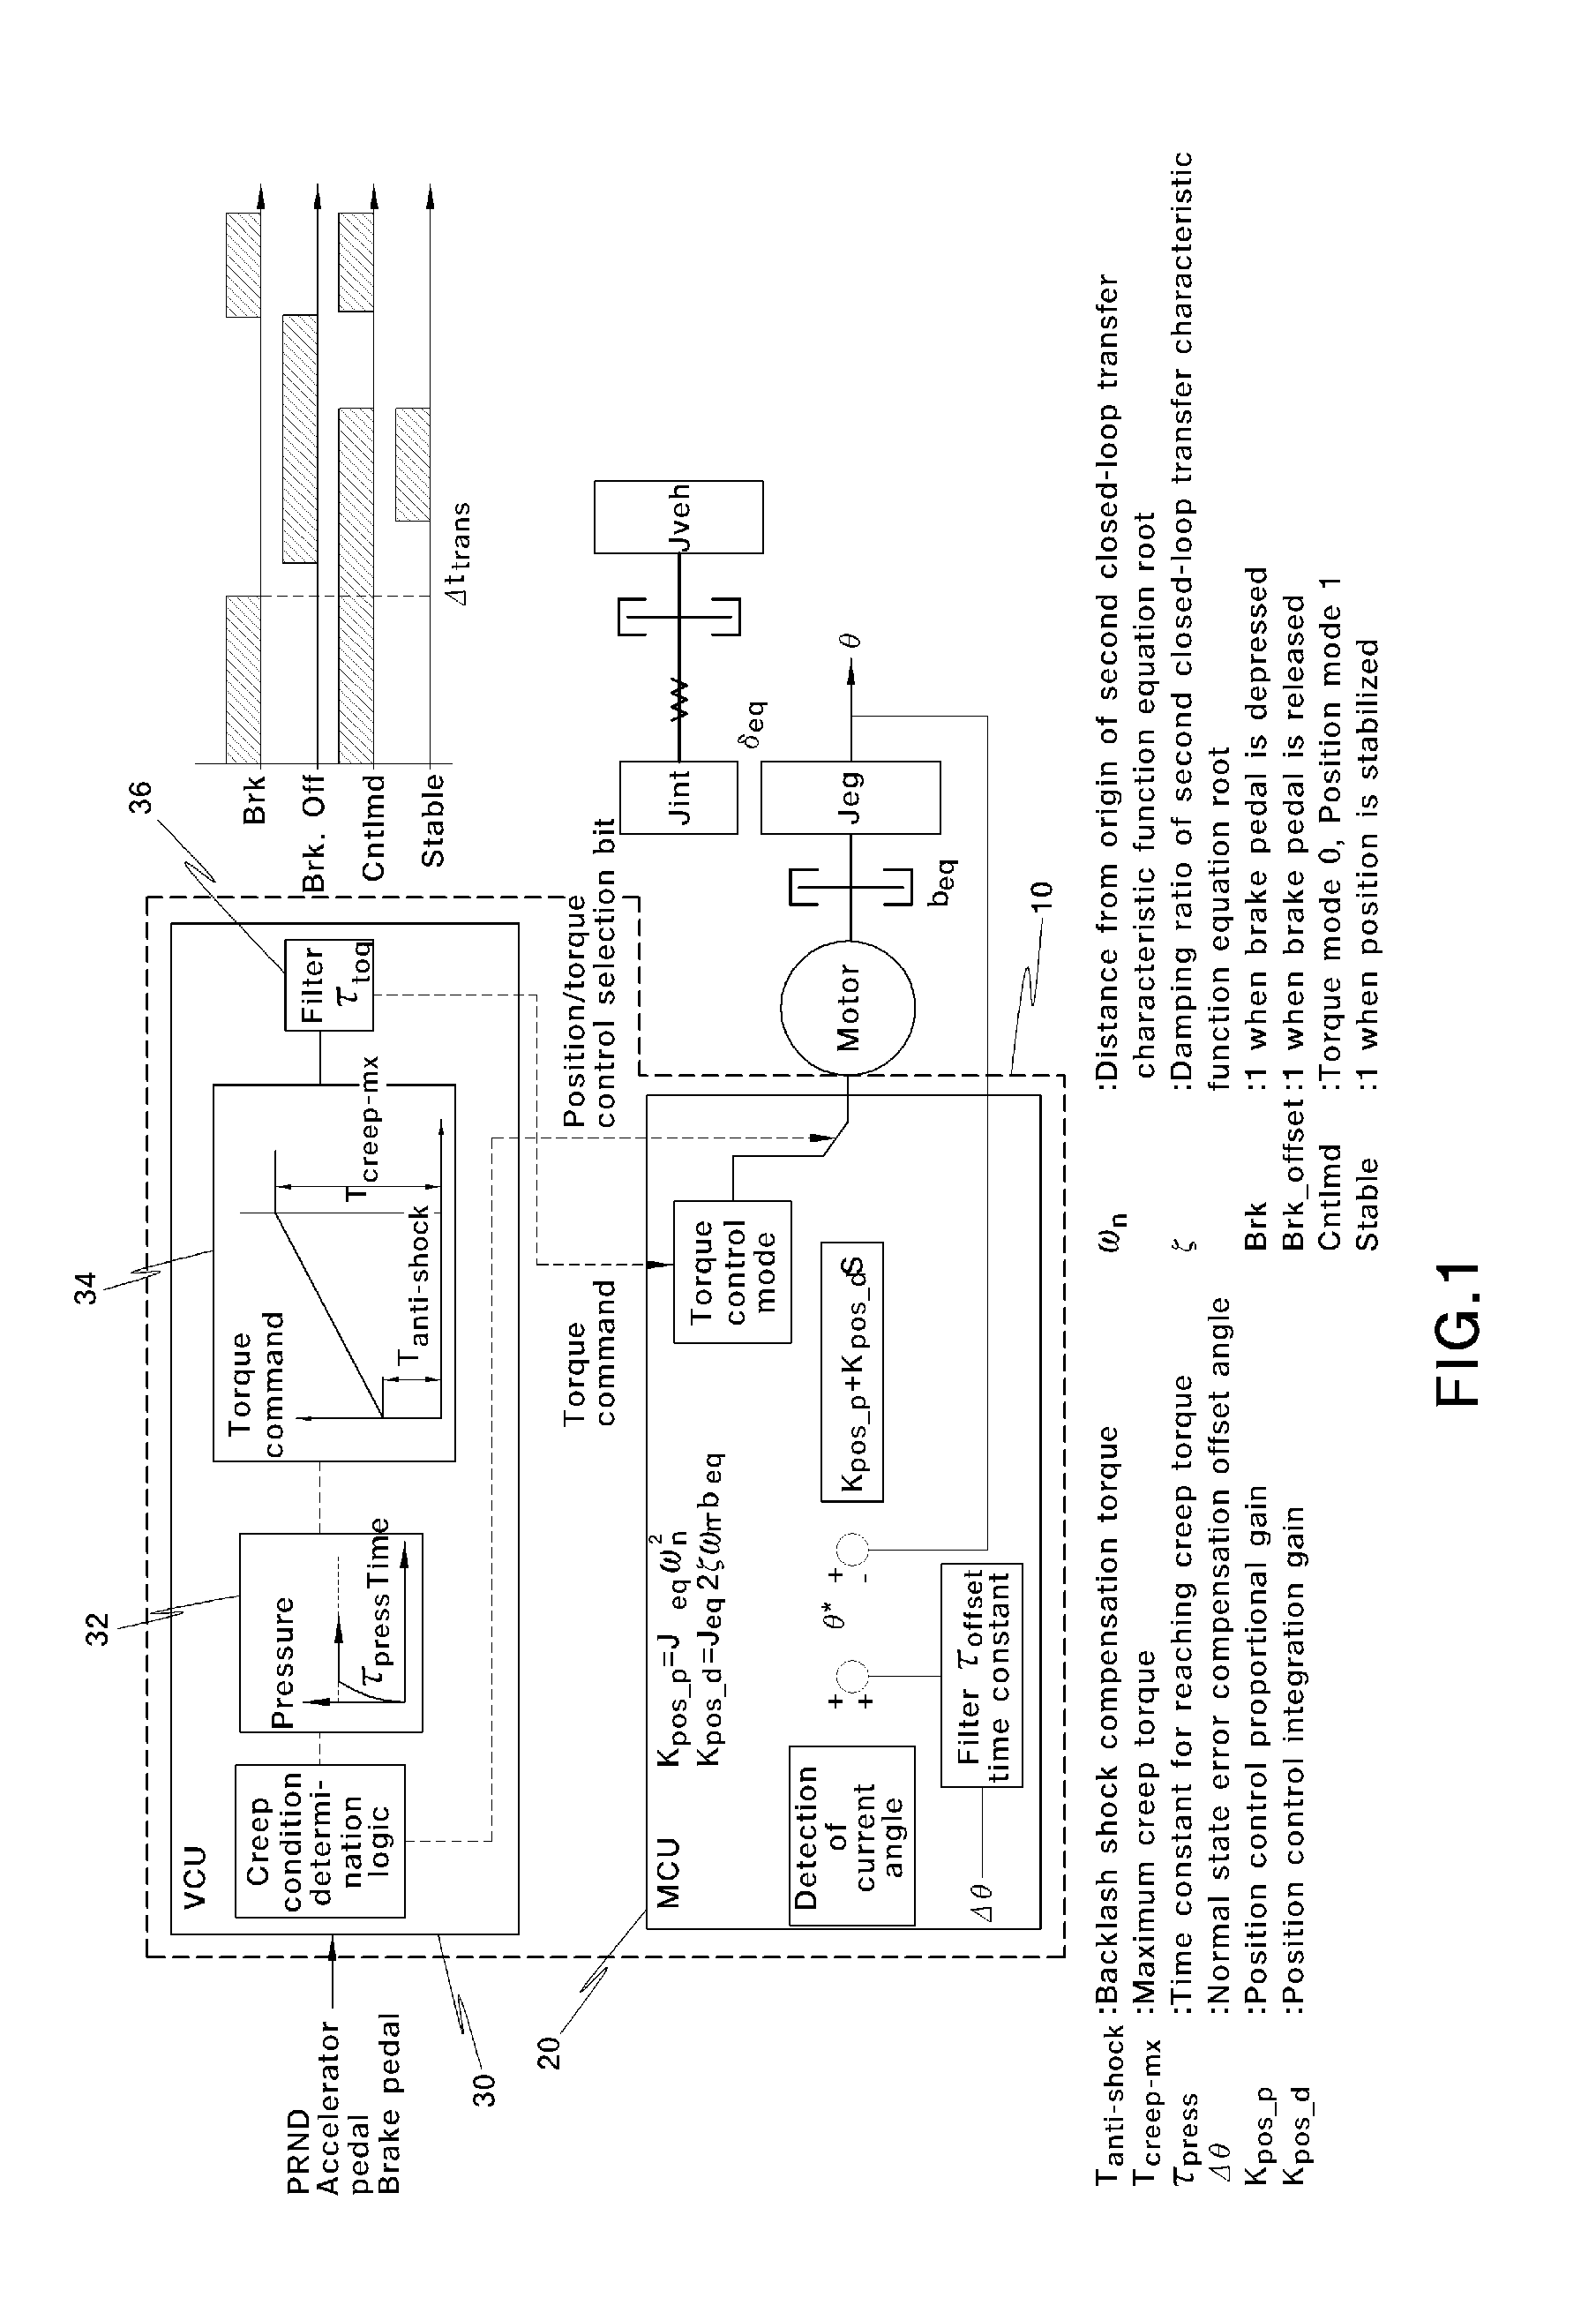 Apparatus and method for controlling motor position and creep of electric vehicle